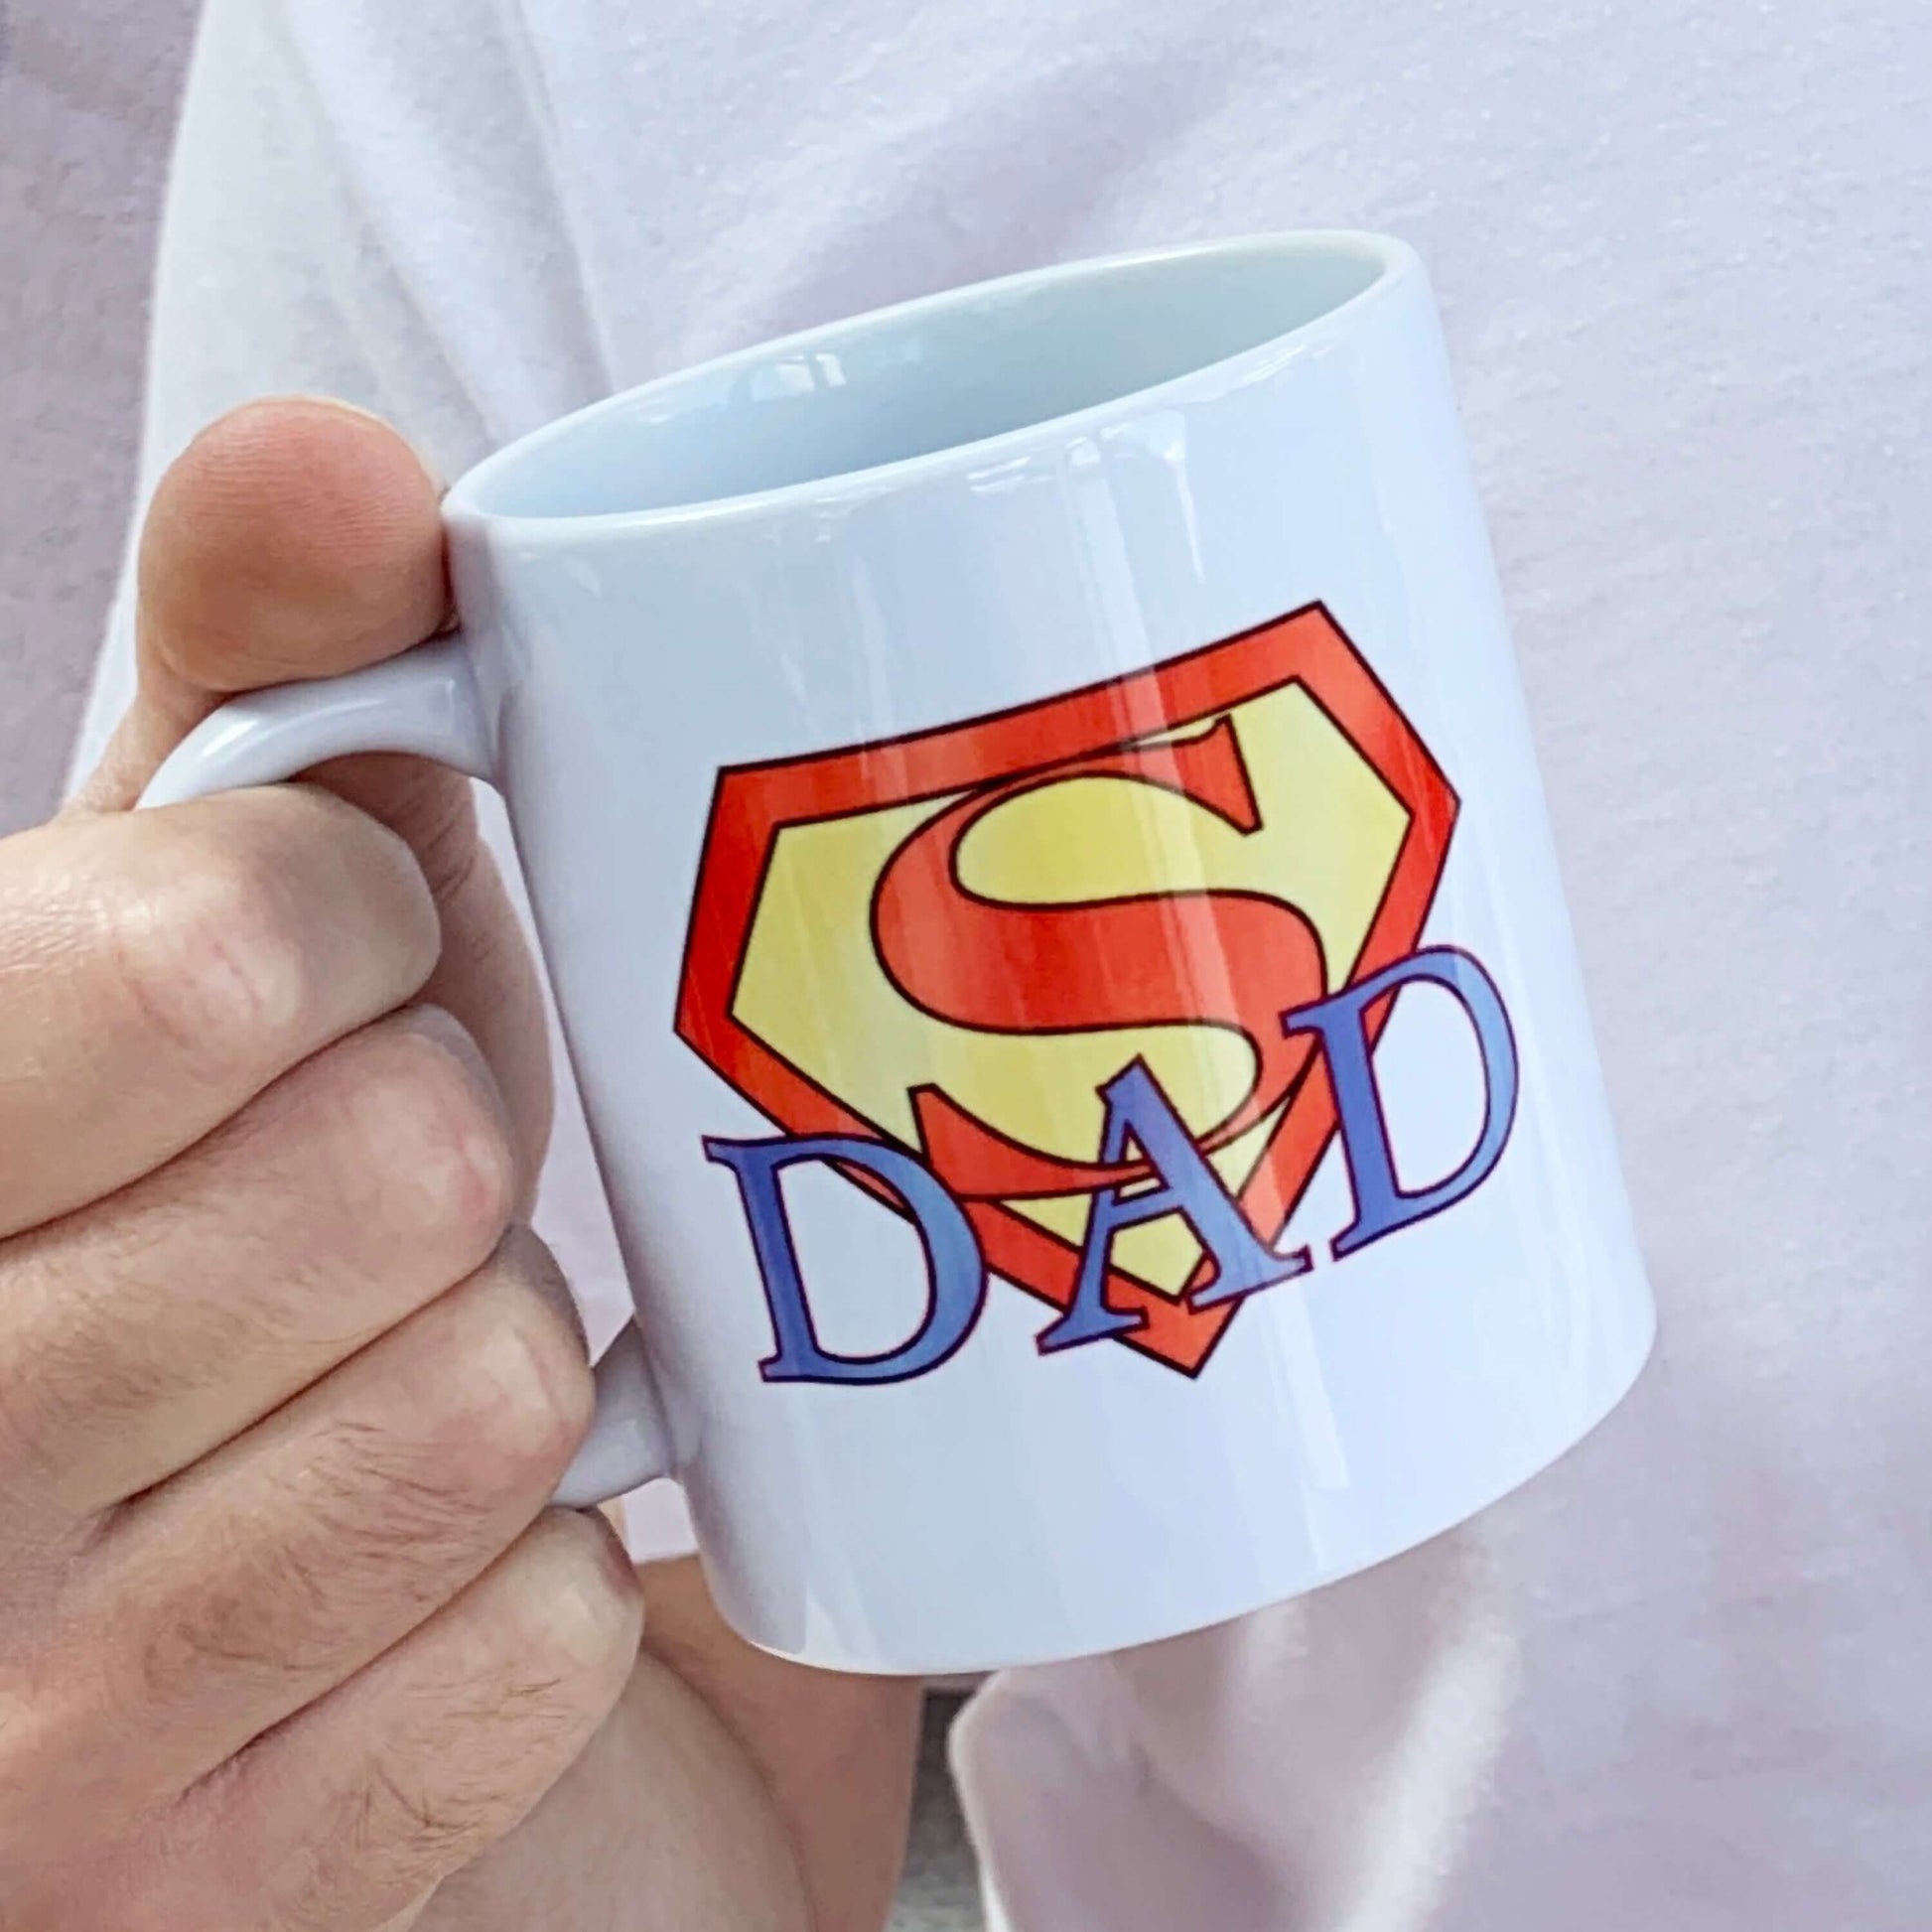 Dad gift ideas - Birthday or Father's Day Gift for Dad - Personalised present with message on reverse side of mug not shown in this image. SuperDad themed design. White ceramic coffee mug with red and yellow Superman Logo design and blue wording " Dad " i